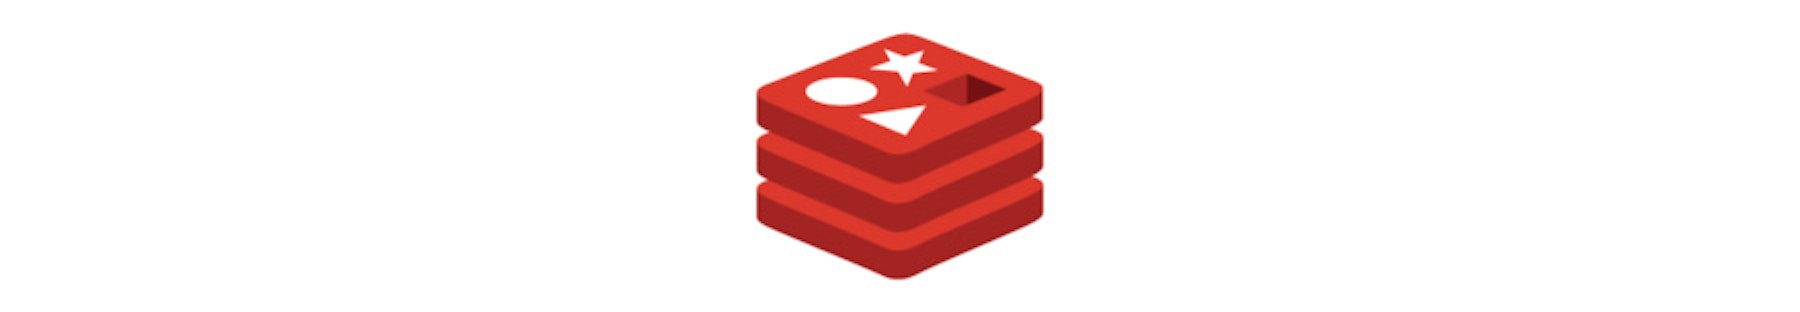 Ending Support for Redis Caching Backplane